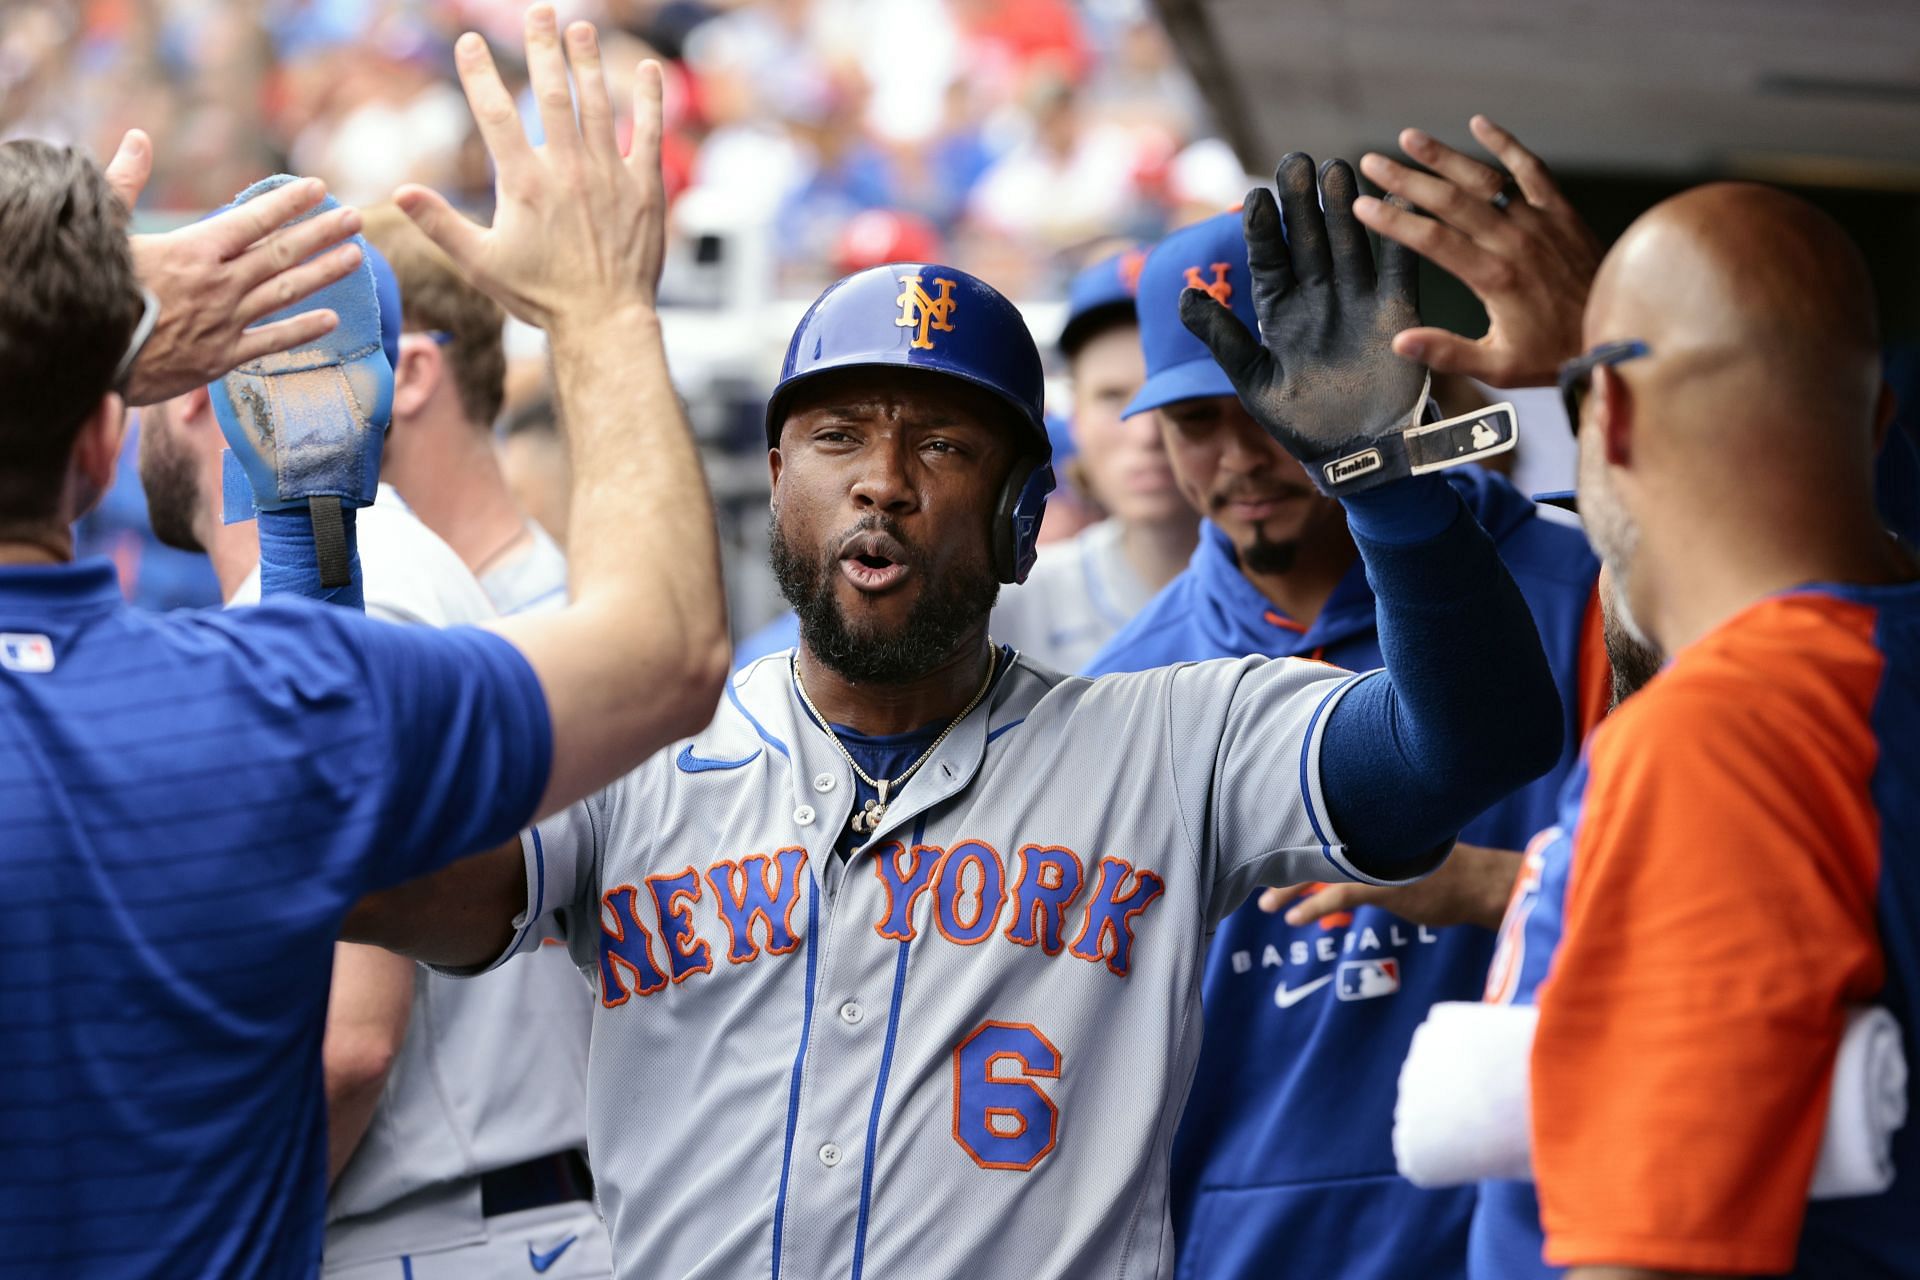 Starling Marte injury update: Mets outfielder placed on IL with